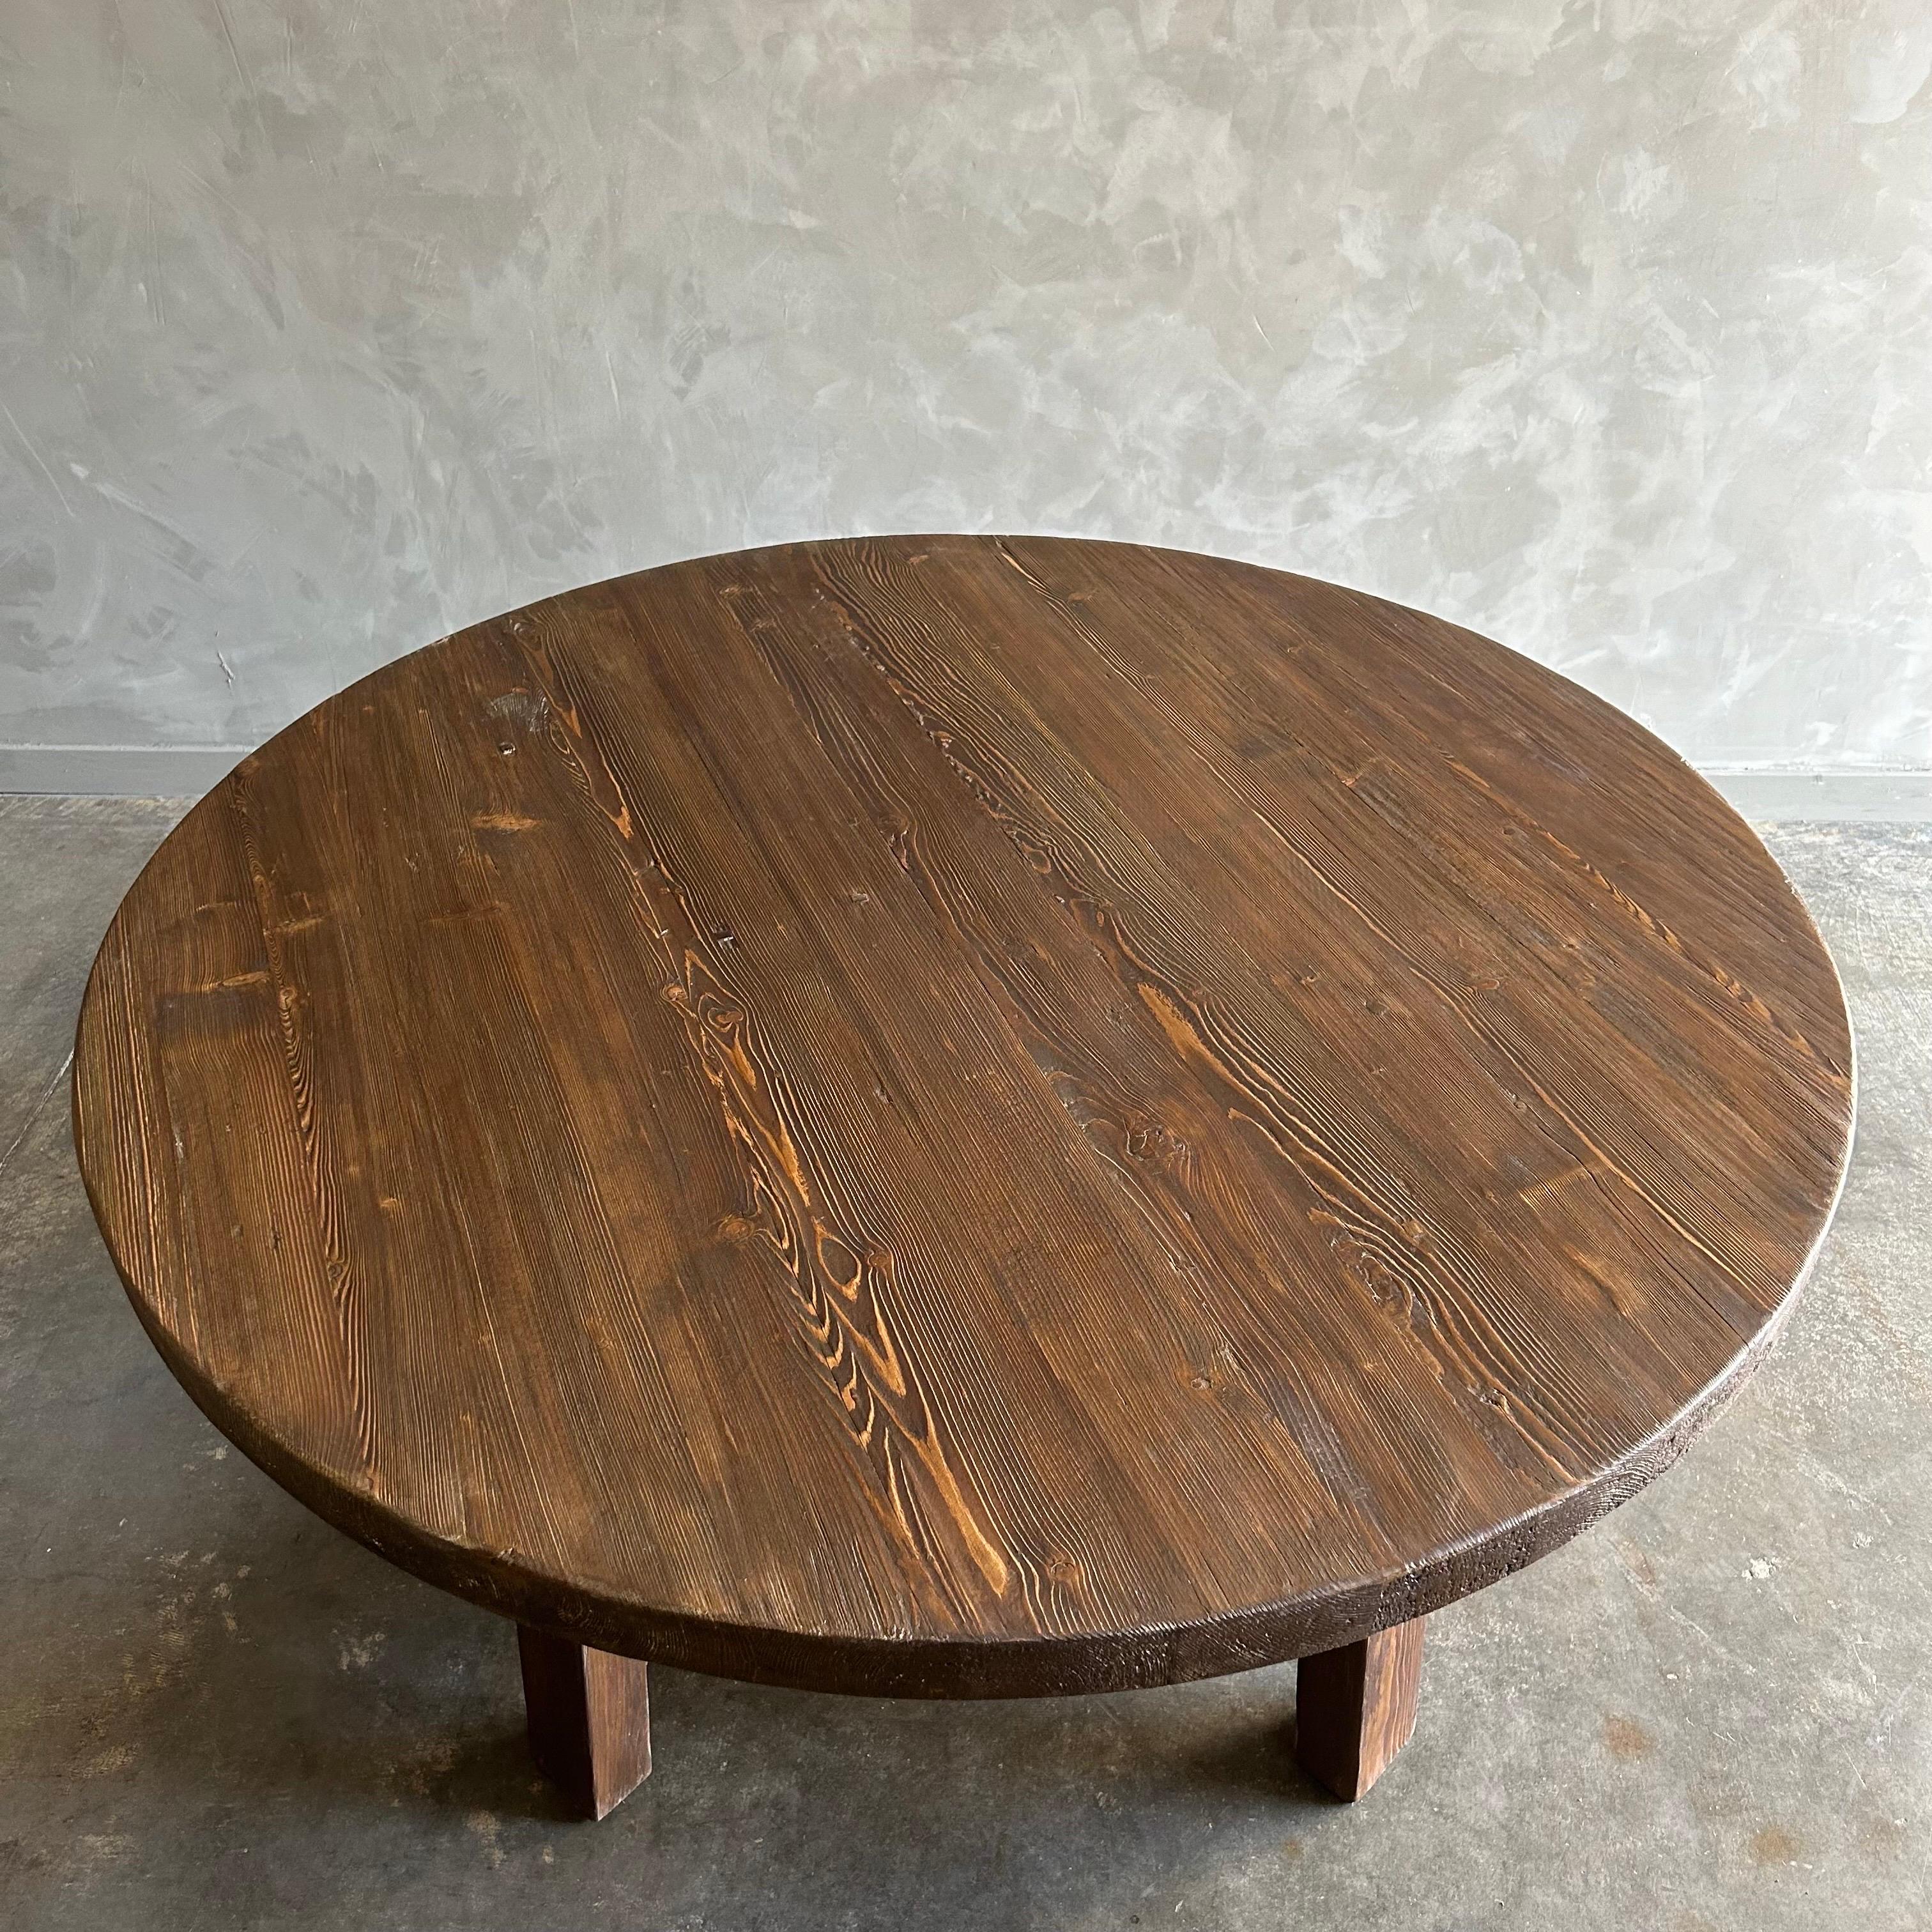 Contemporary Custom Made Reclaimed Elm Wood Round Dining Table 60